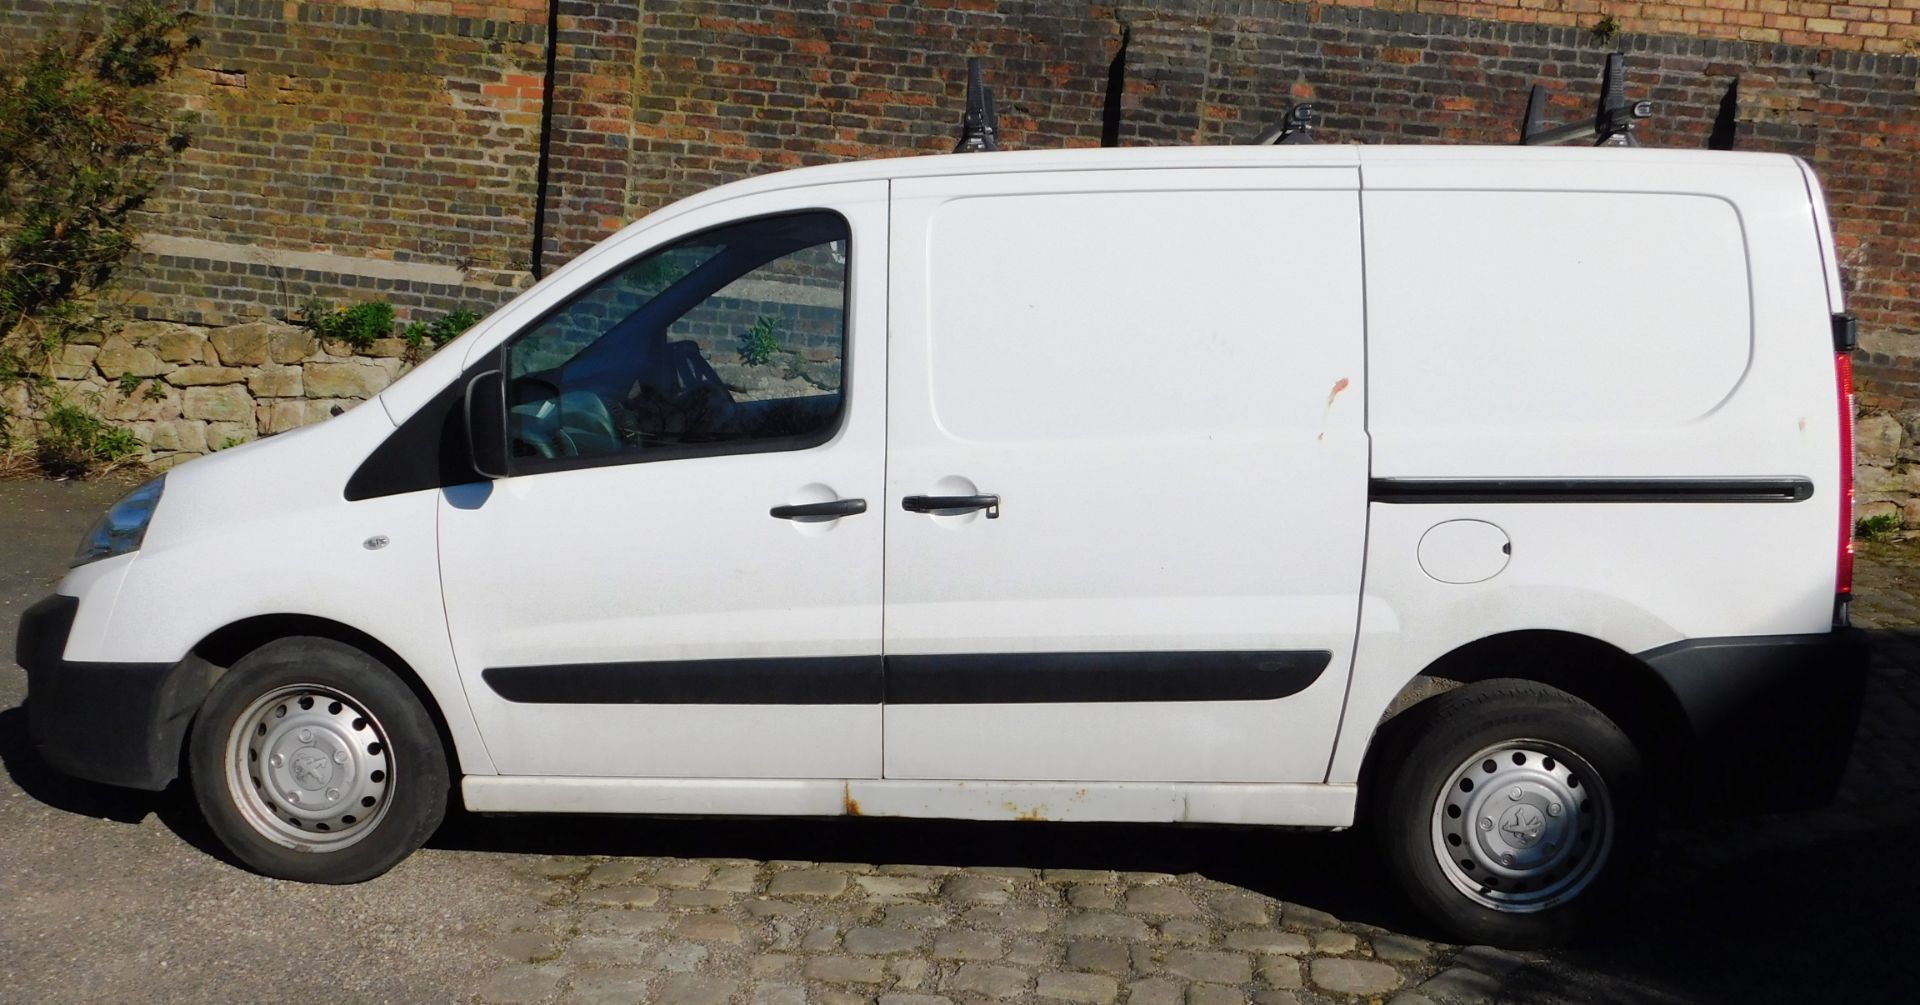 Peugeot Expert L1 1000 1.6 HDi 90 H1 panel van, registration OV15 WXY, first registered 31 May 2015, - Image 2 of 14